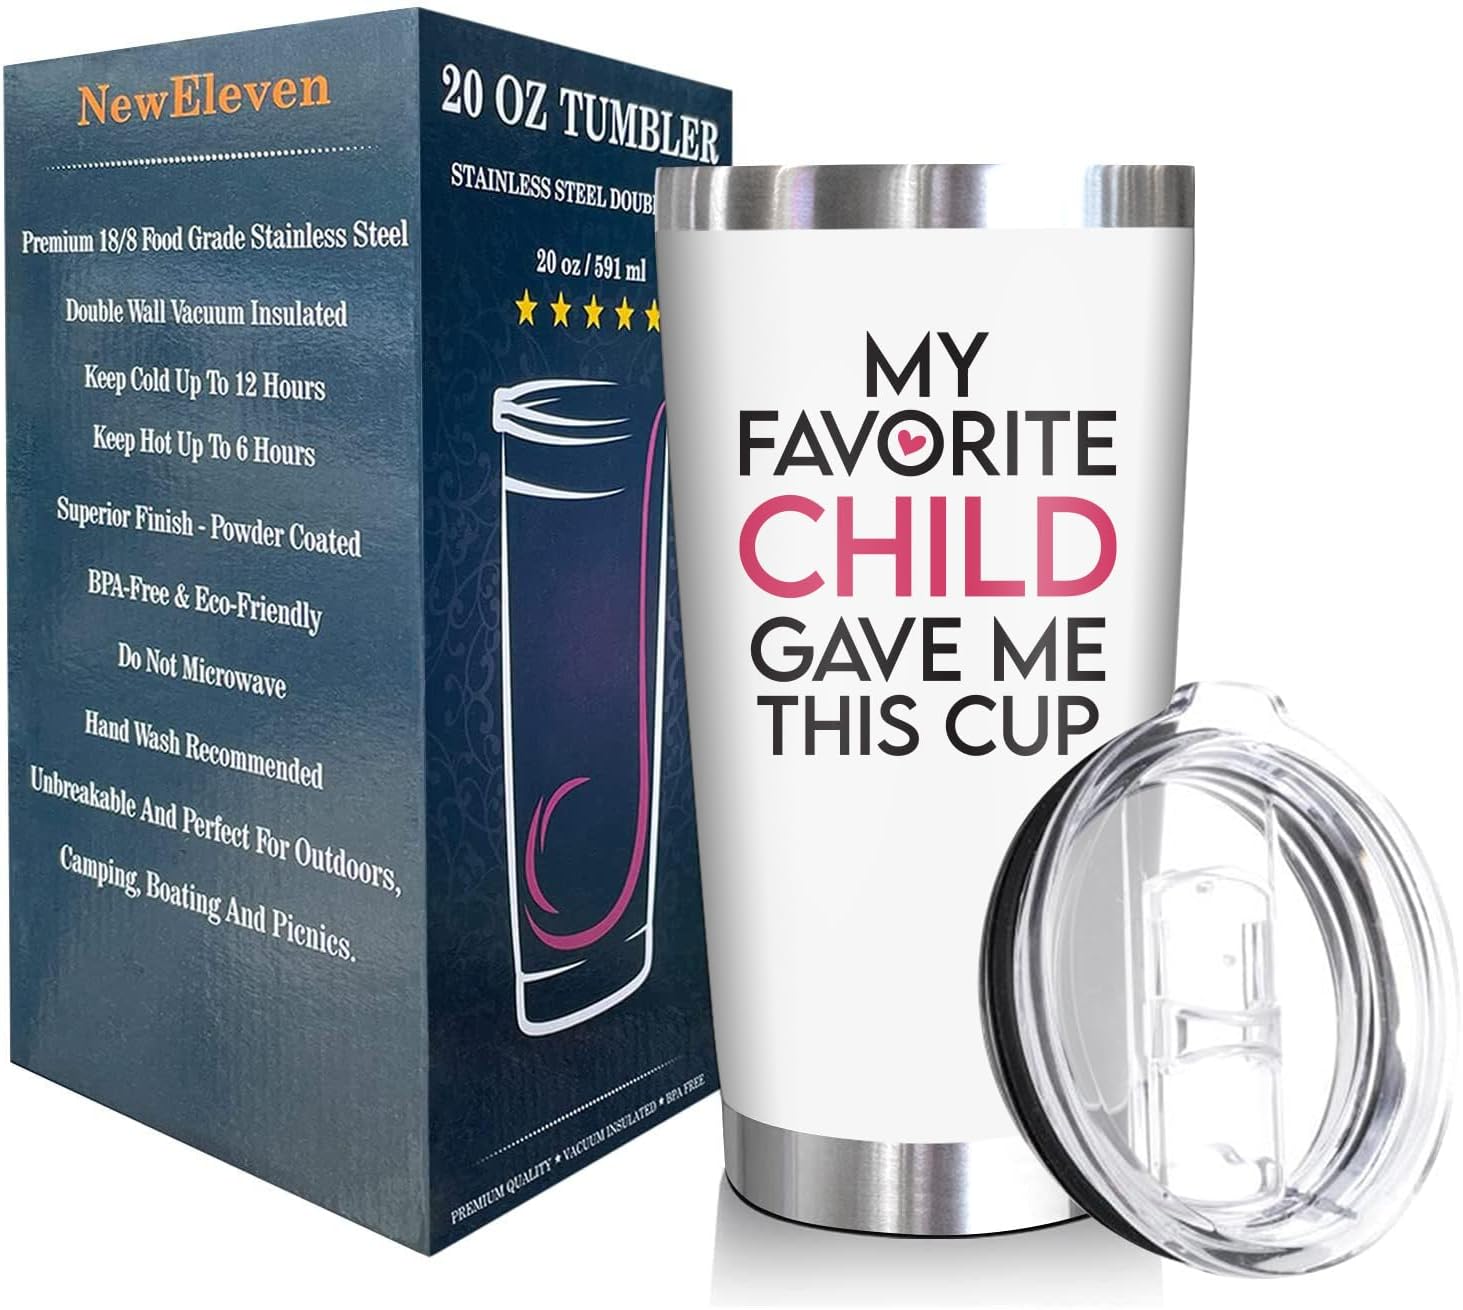 Best Mom Ever 20 oz Tumbler – Sips & Gifts